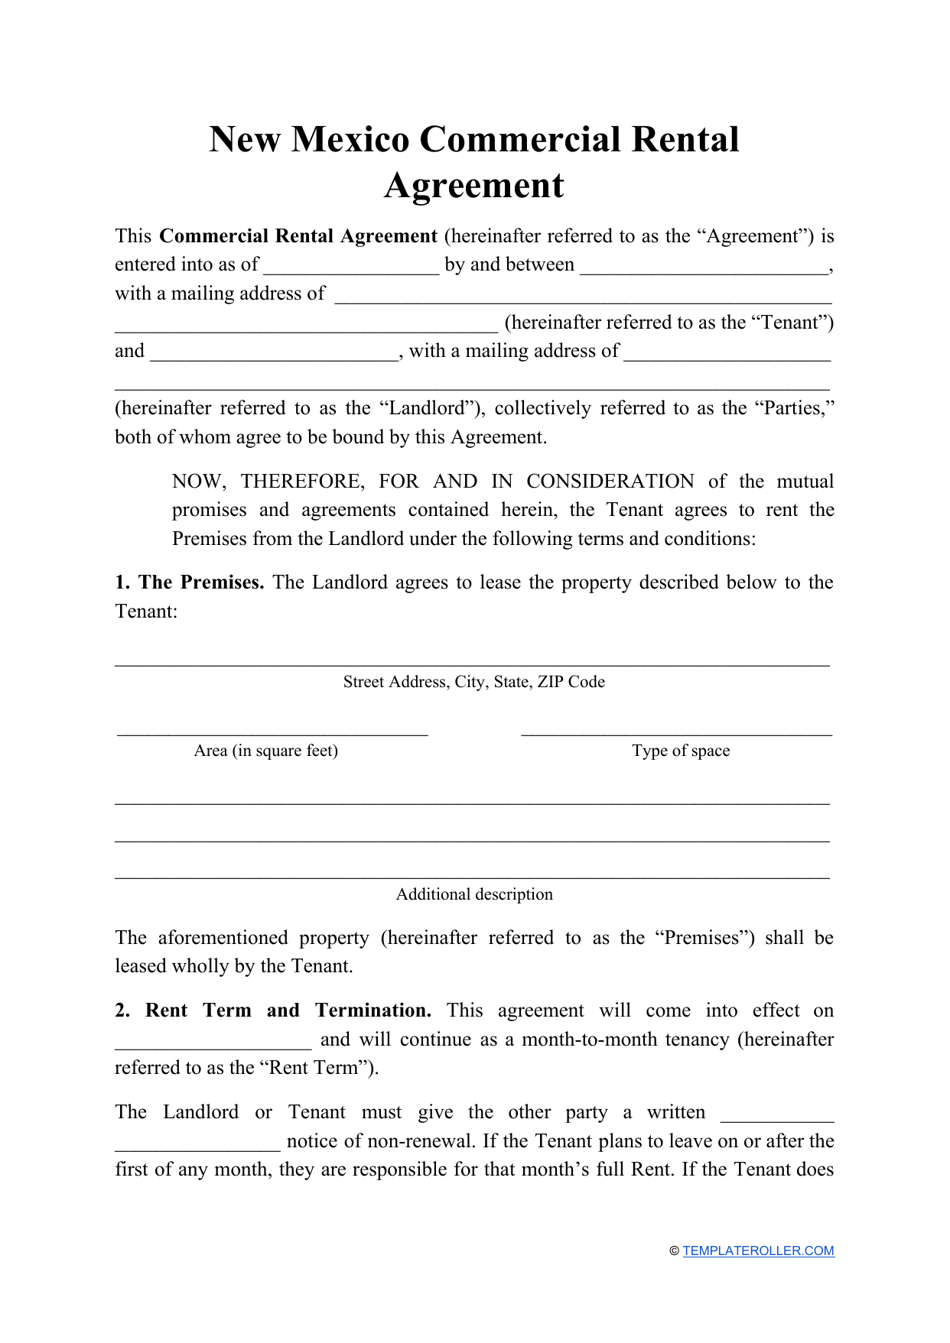 Commercial Rental Agreement Template - New Mexico, Page 1